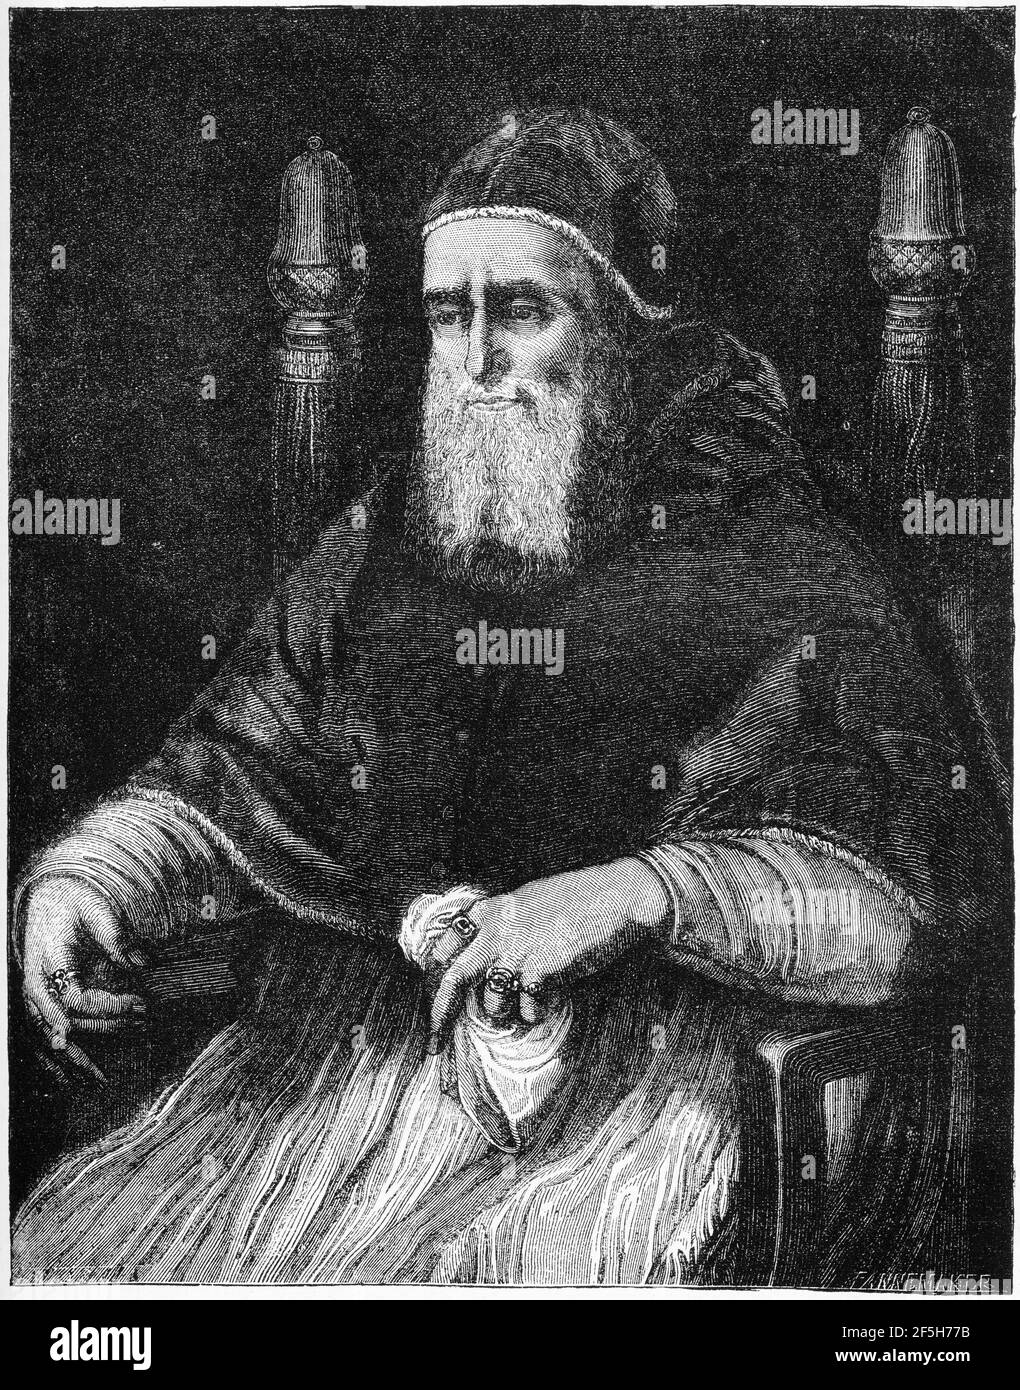 Engraving of Pope Julius II, ruler of the Papal States from 1503 to his death in 1513. illustration from 'The history of Protestantism' by James Aitken Wylie (1808-1890), pub. 1878 Stock Photo